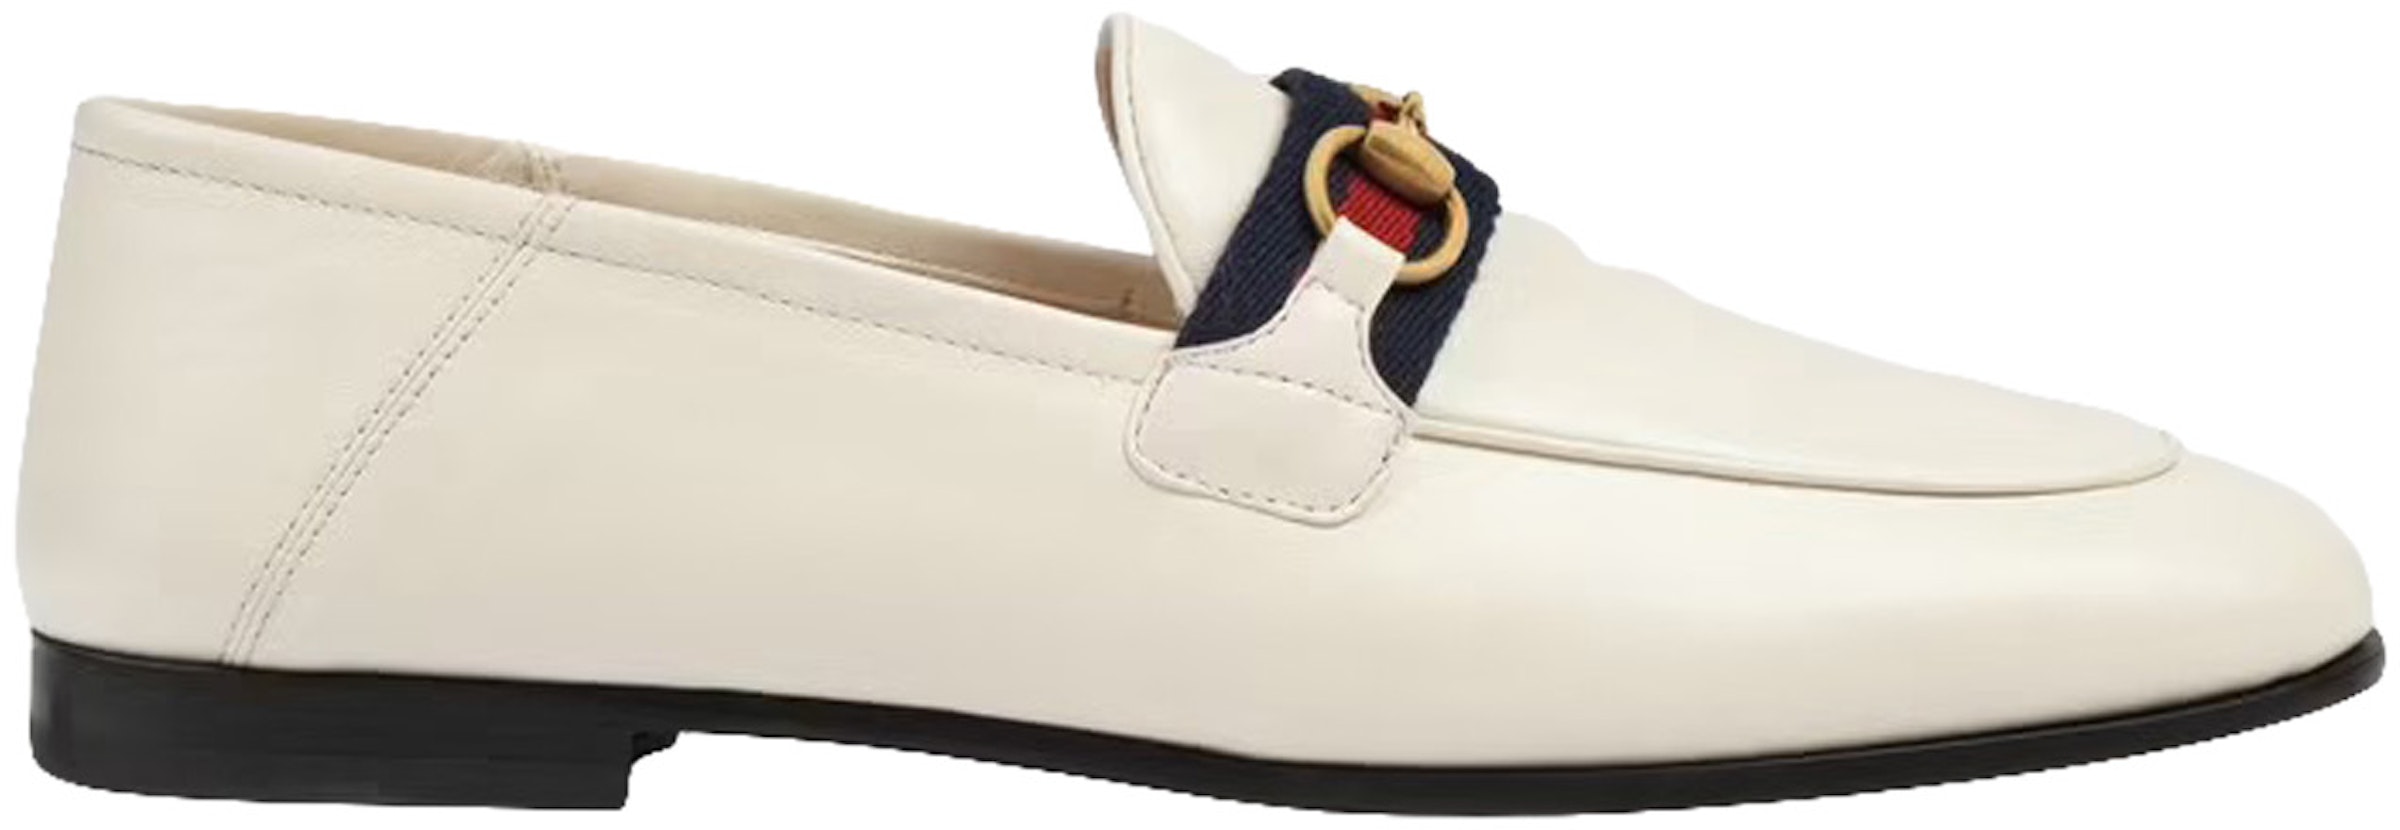 Parasit Excel Teenager Buy Gucci Loafers Shoes & New Sneakers - StockX